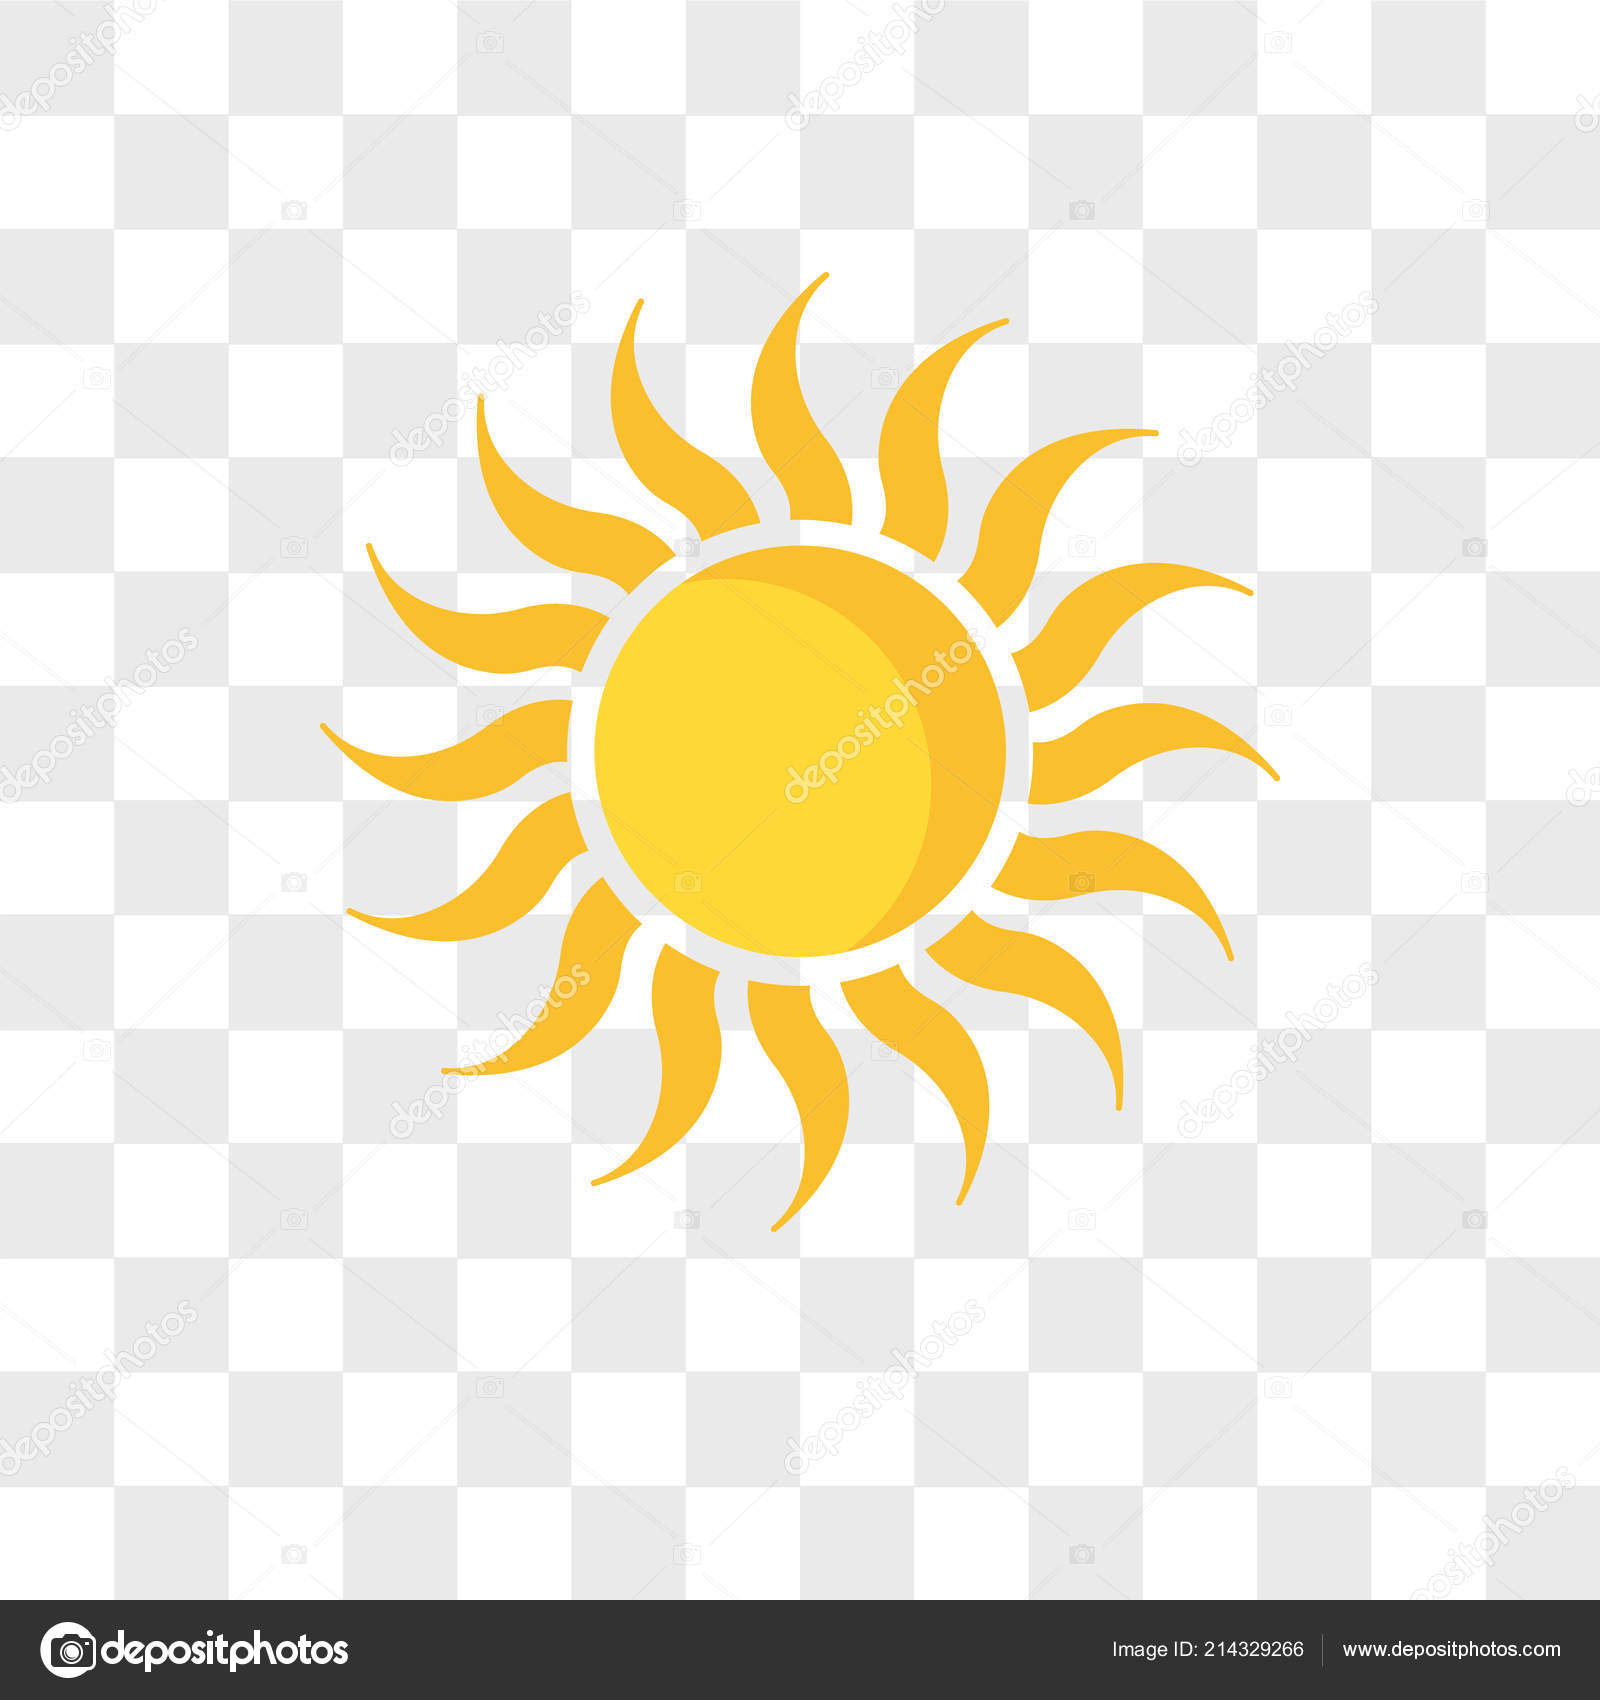 Sol vector icon isolated on transparent background, Sol logo